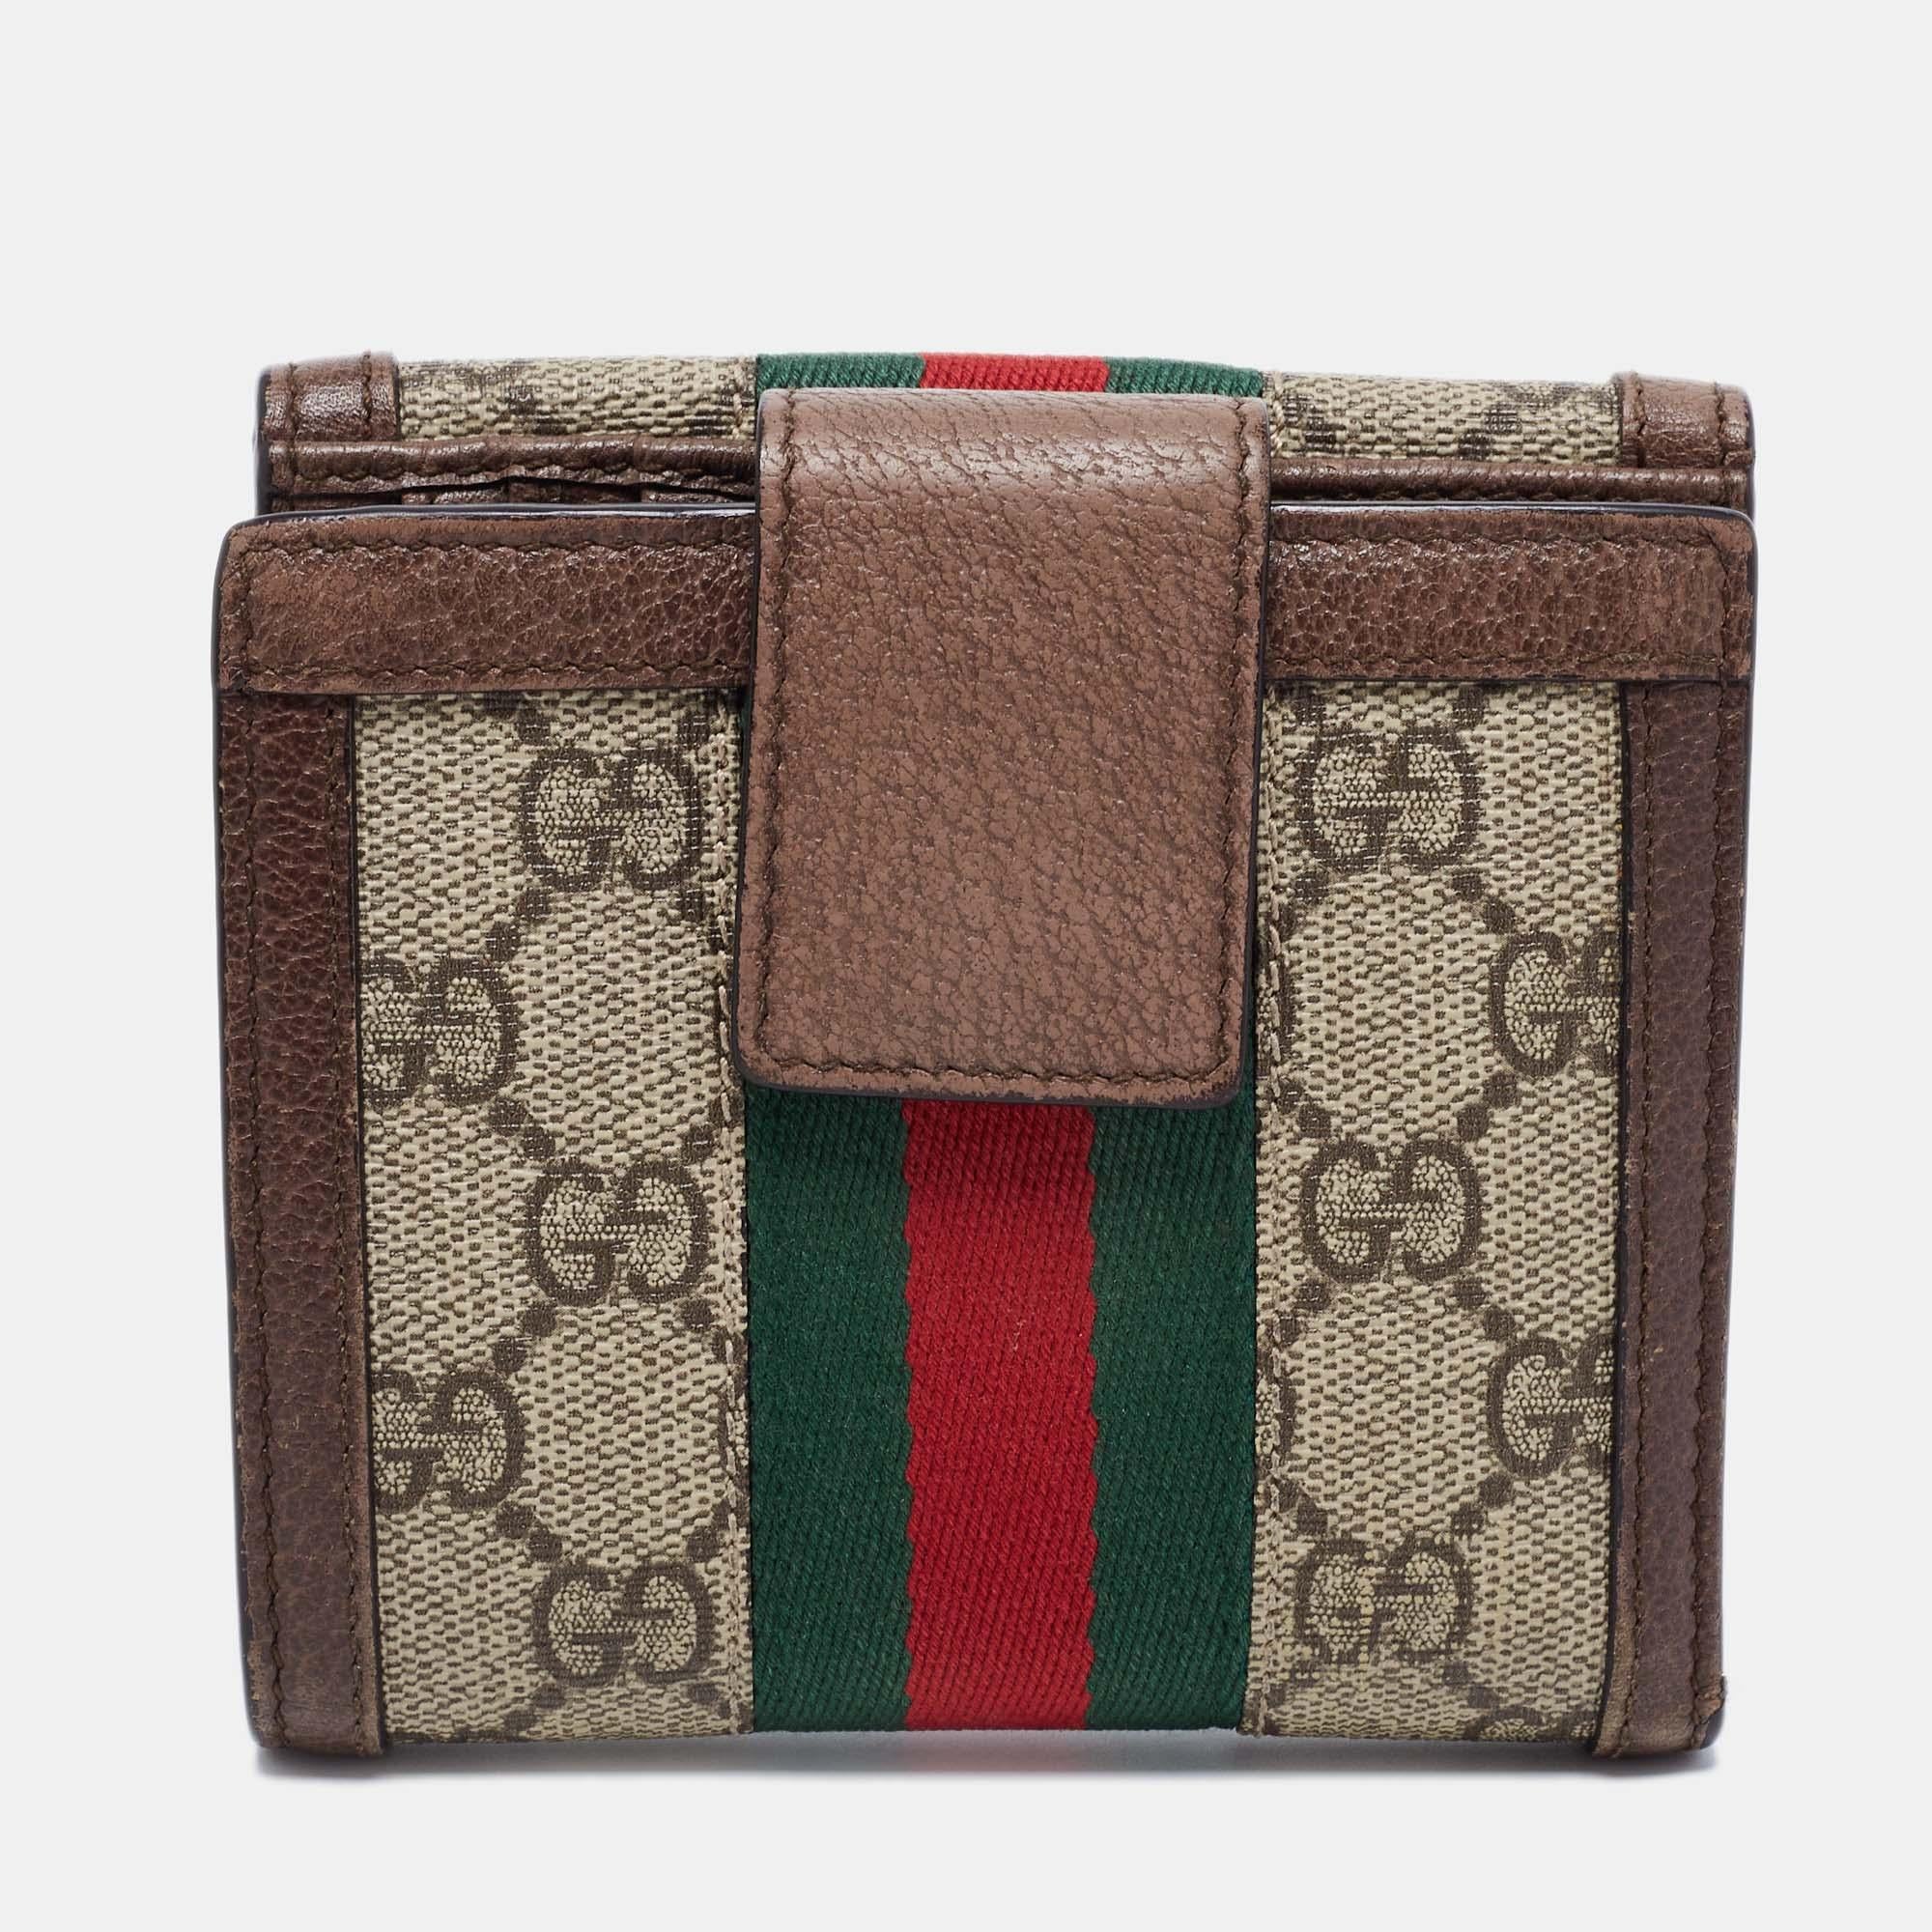 The house of Gucci makes sure you stay at the top of your accessory game with this pretty wallet. Crafted from coated canvas and leather, it has a flap closure and multiple card slots for easy organization. The brown-beige piece is complete with the